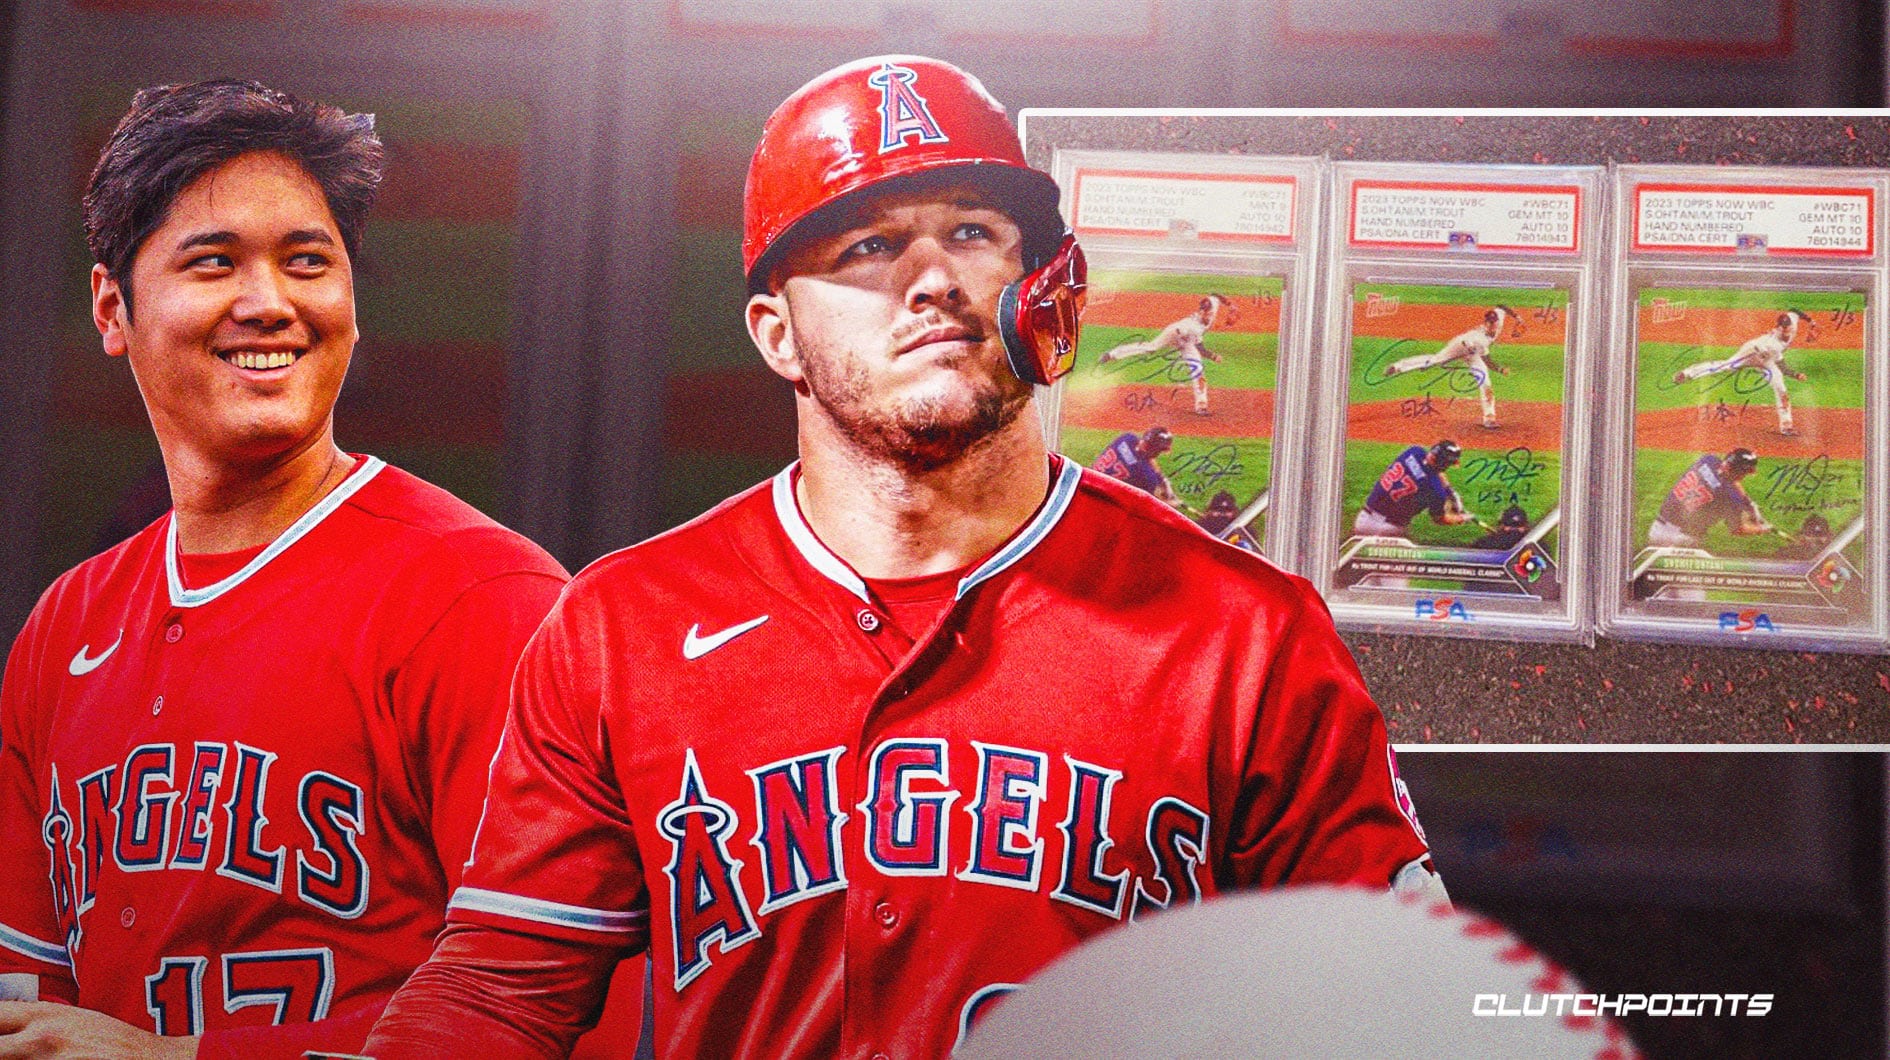 Angels stars Mike Trout, Shohei Ohtani team up for epic 'Troutani